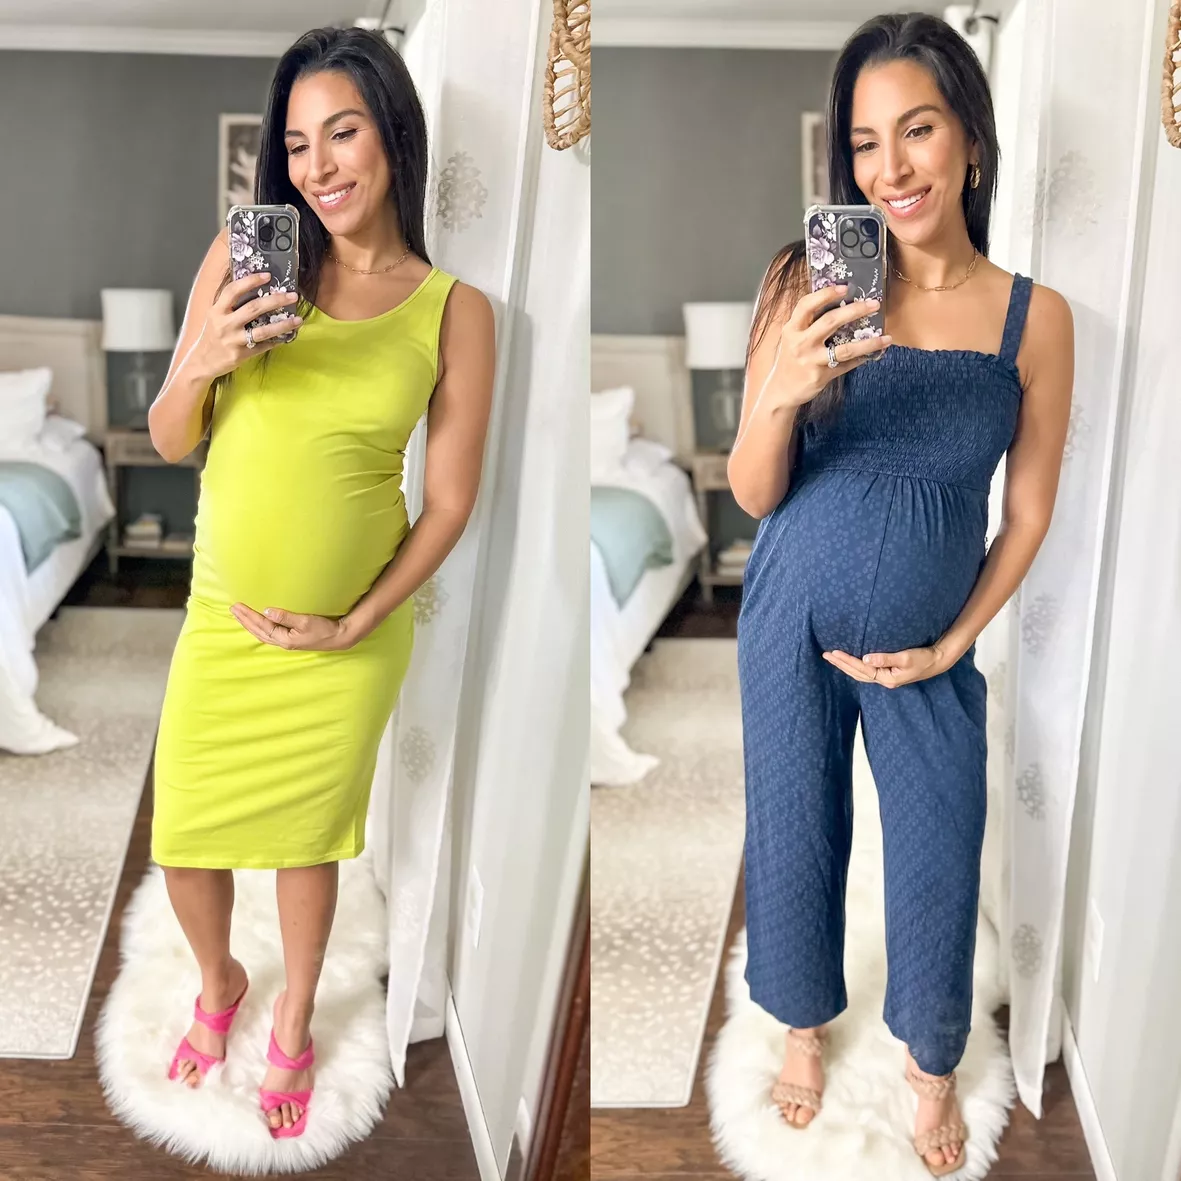 Bumplife  Isabel Maternity For Target - Fortuitous Foodies